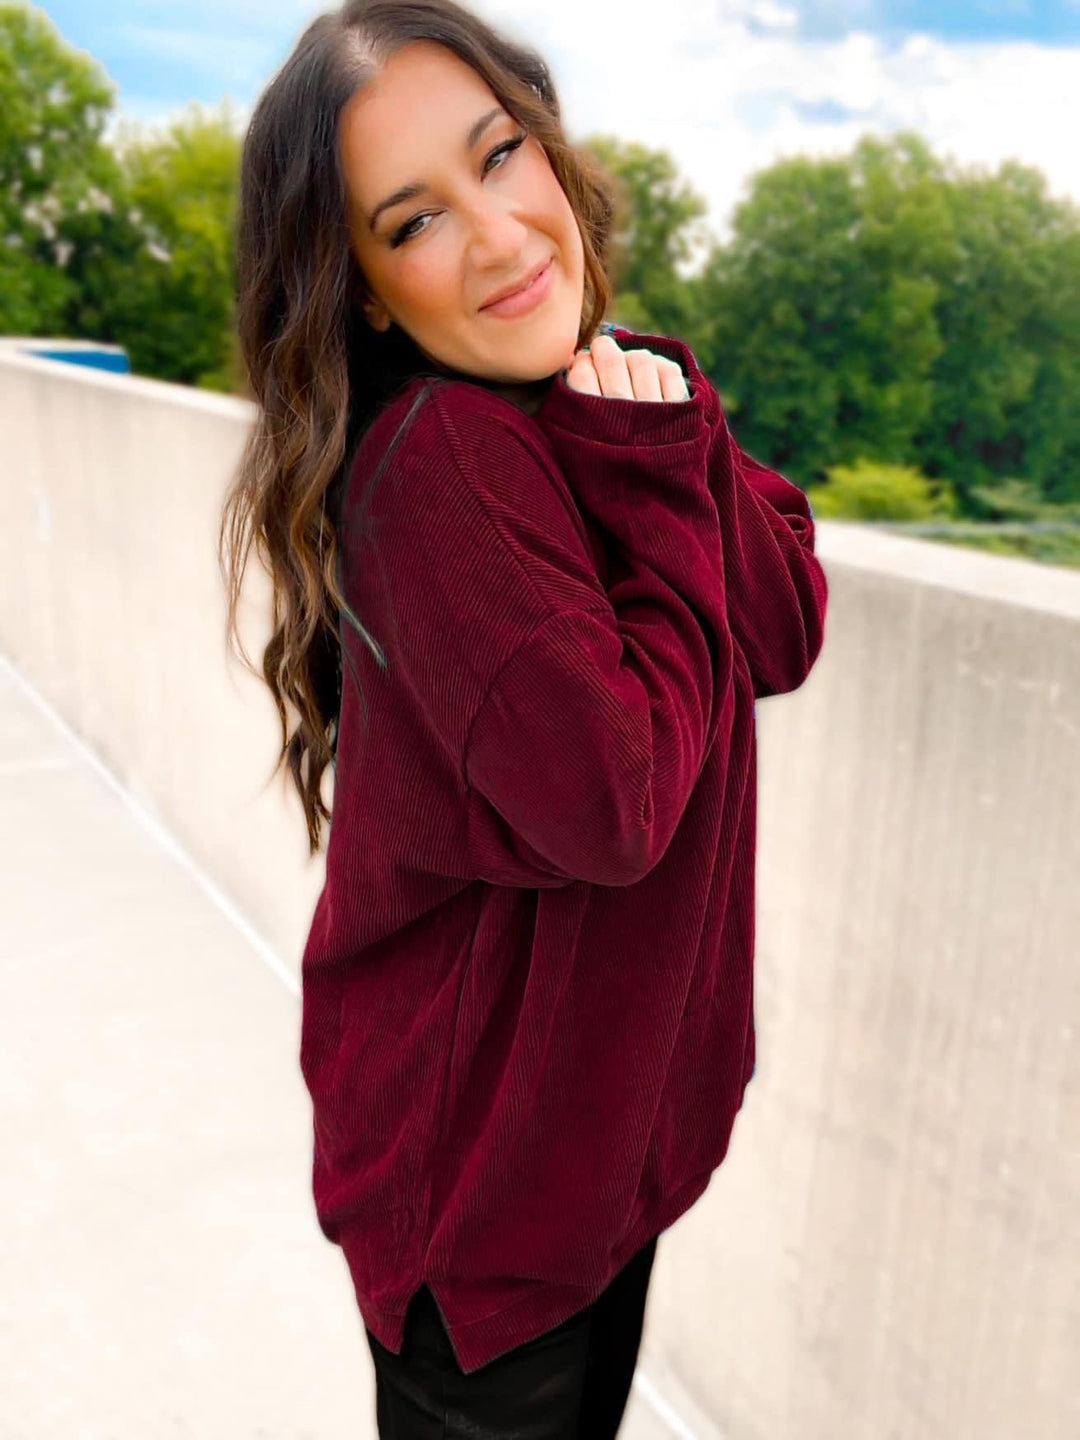 Charlie Luxury Corded Crew Sweatshirts, Burgundy-Sweaters/Sweatshirts-Inspired by Justeen-Women's Clothing Boutique in Chicago, Illinois